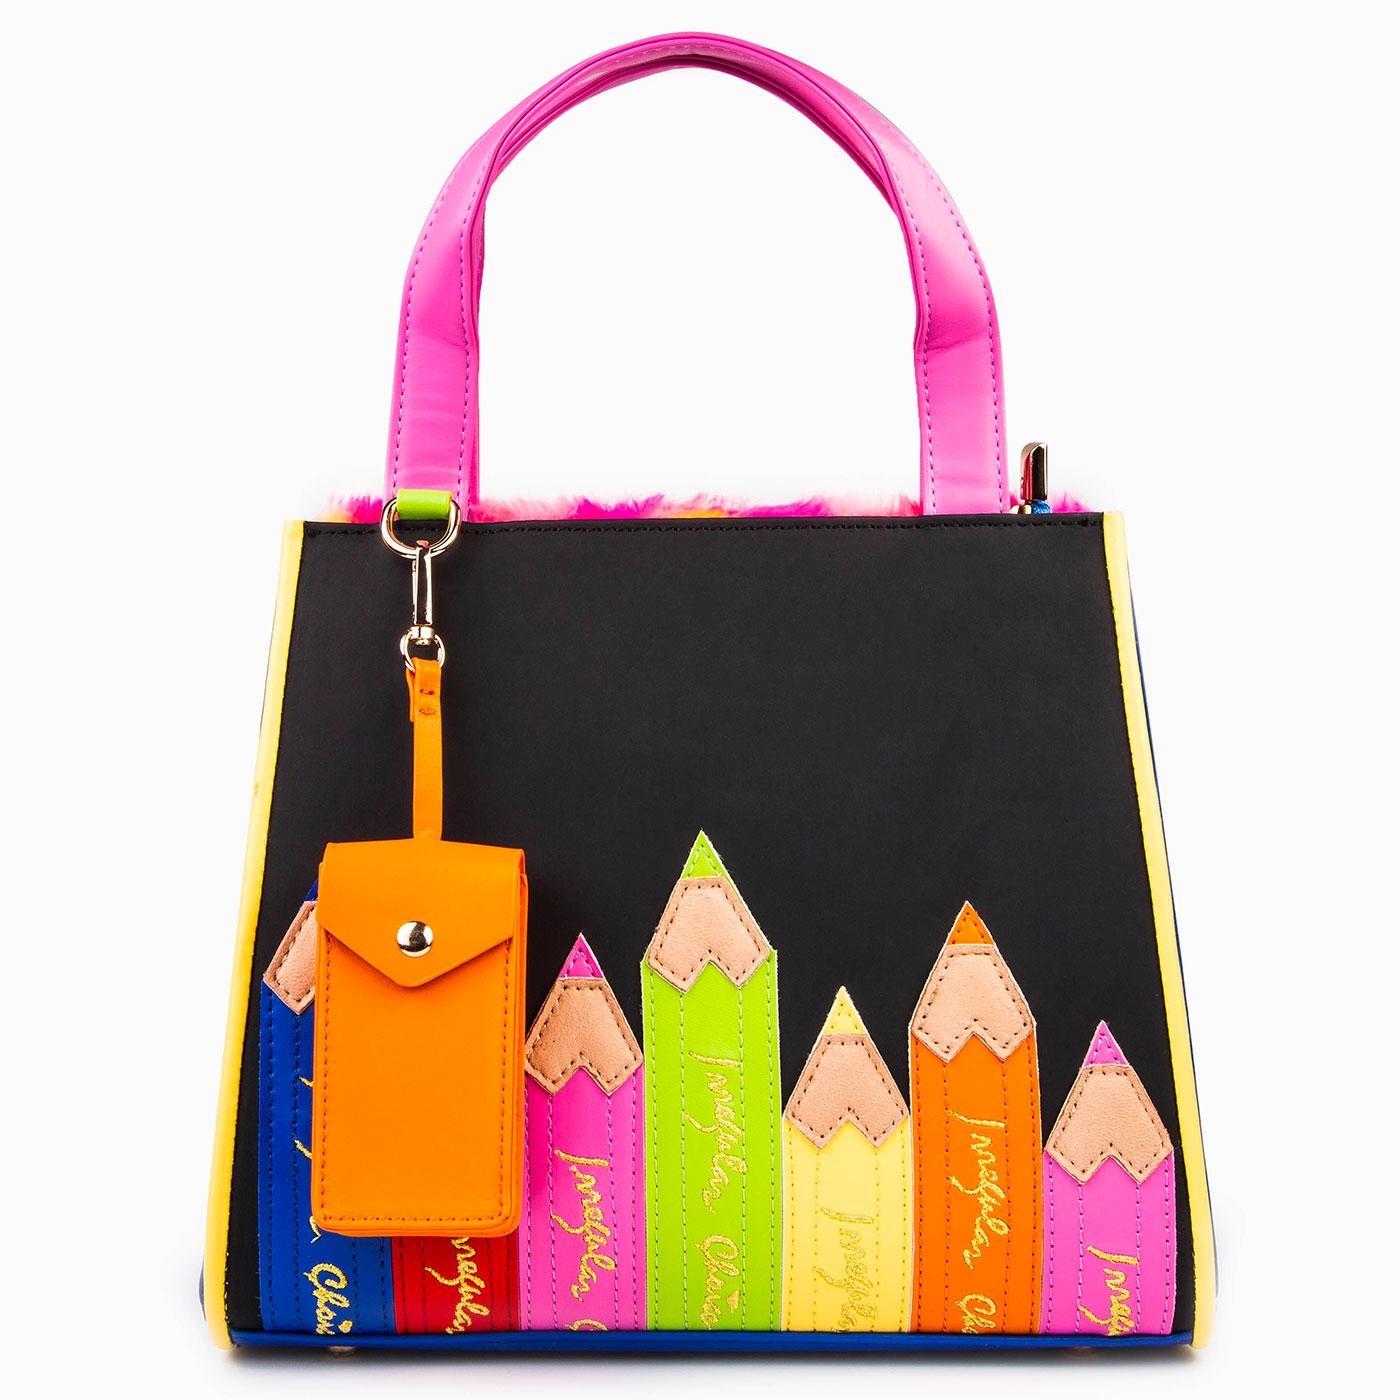 Pencil Me In IRREGULAR CHOICE Bag with Chalk